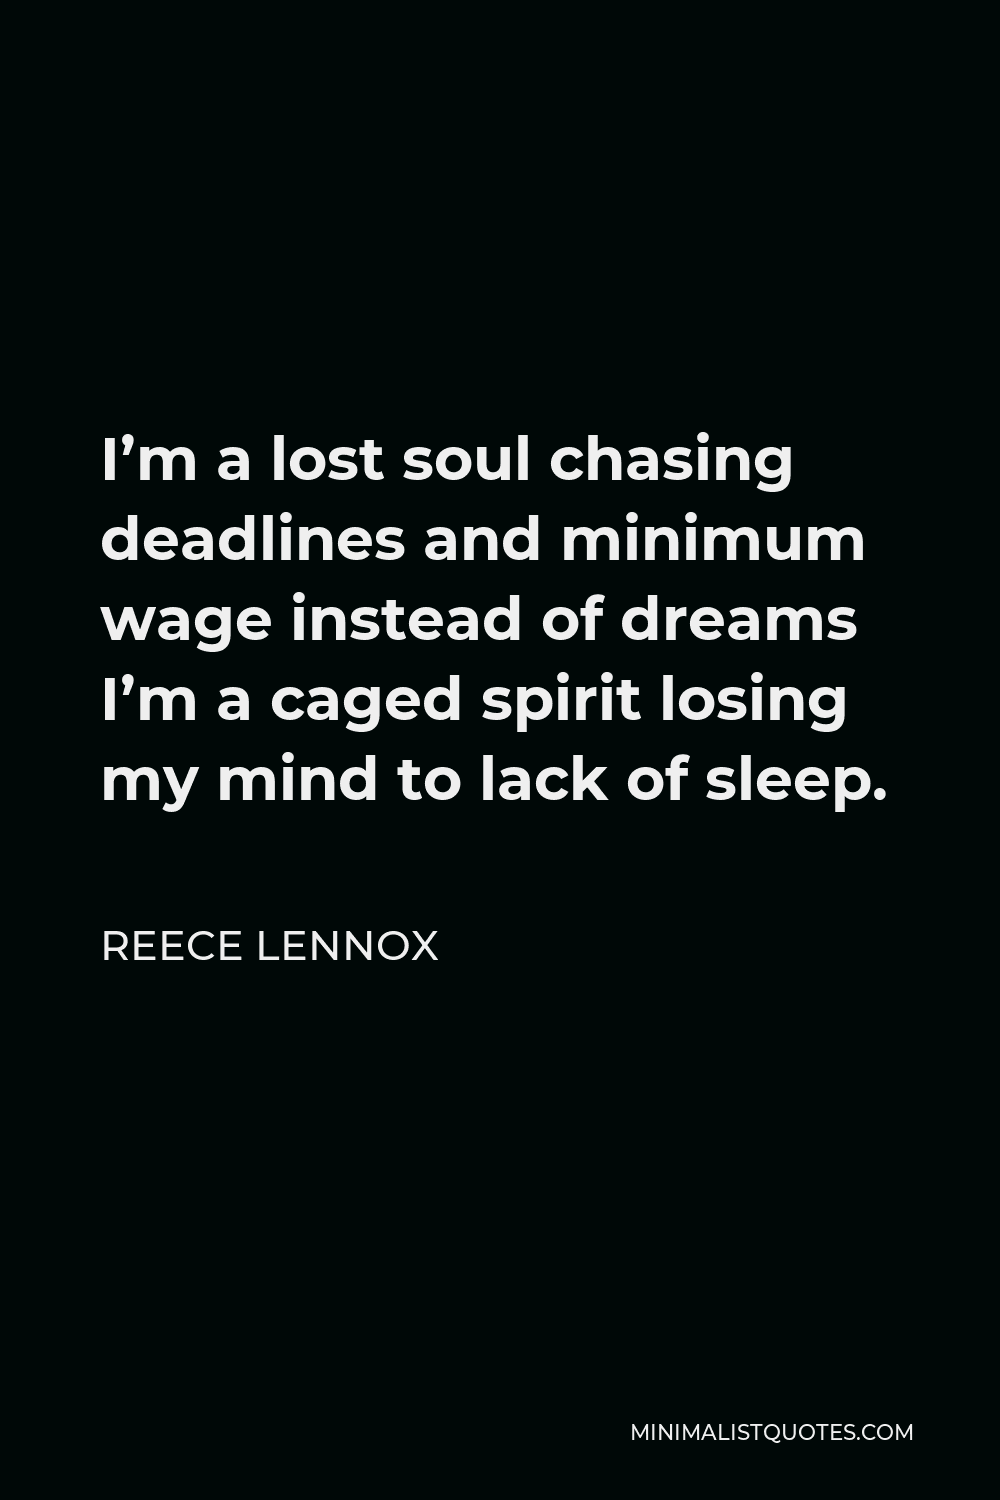 Reece Lennox Quote - I’m a lost soul chasing deadlines and minimum wage instead of dreams I’m a caged spirit losing my mind to lack of sleep.